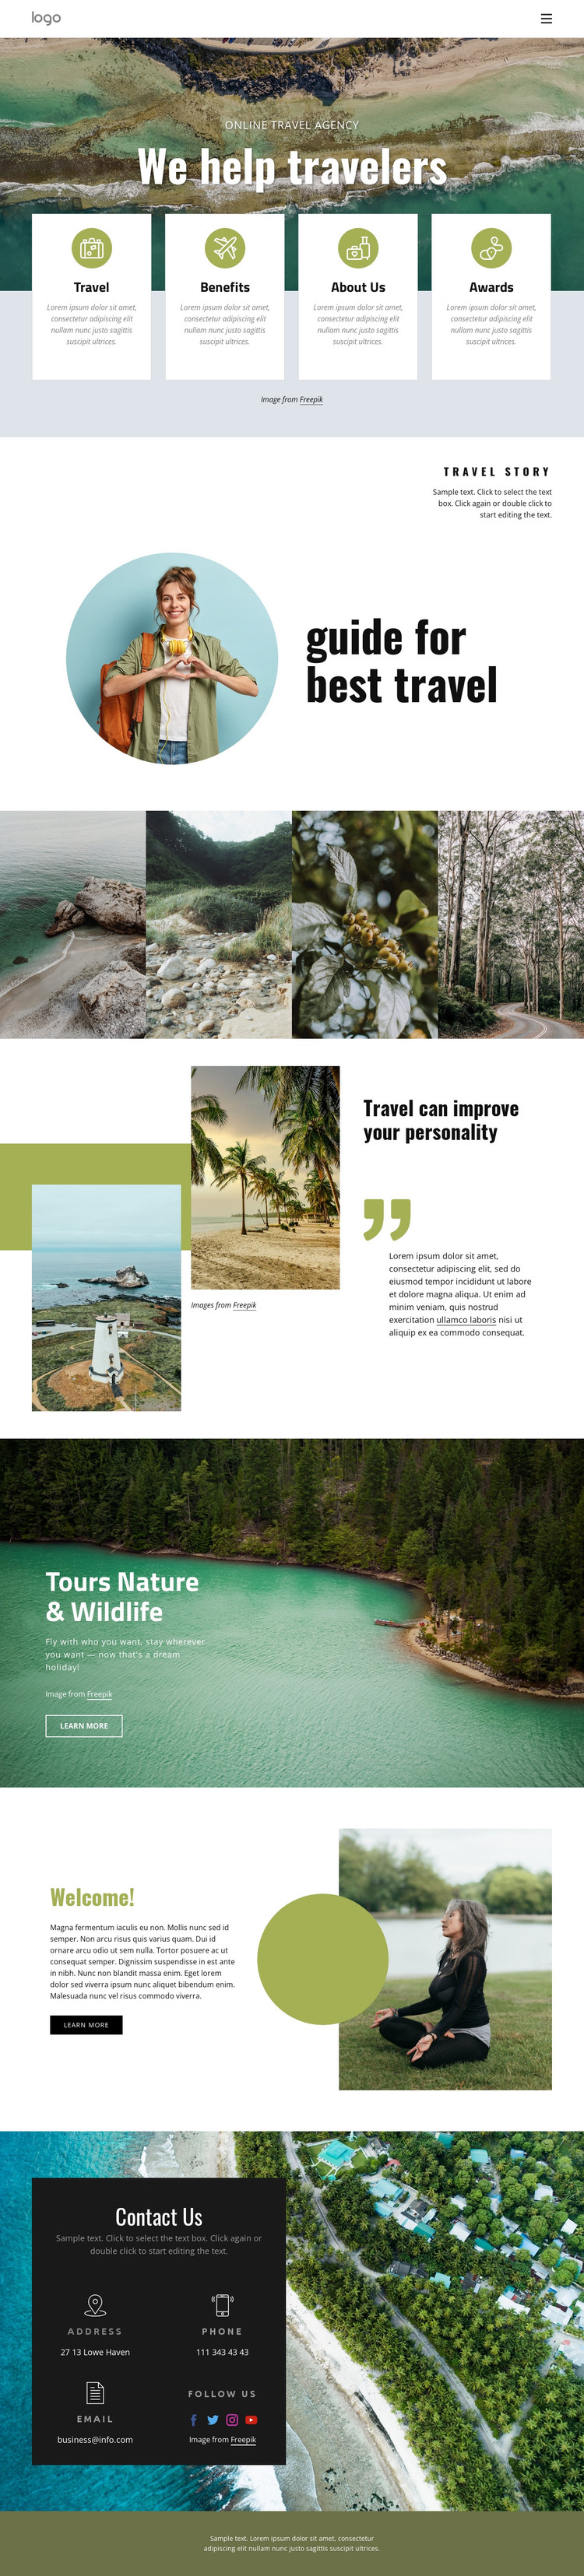 We help manage your trip Web Design